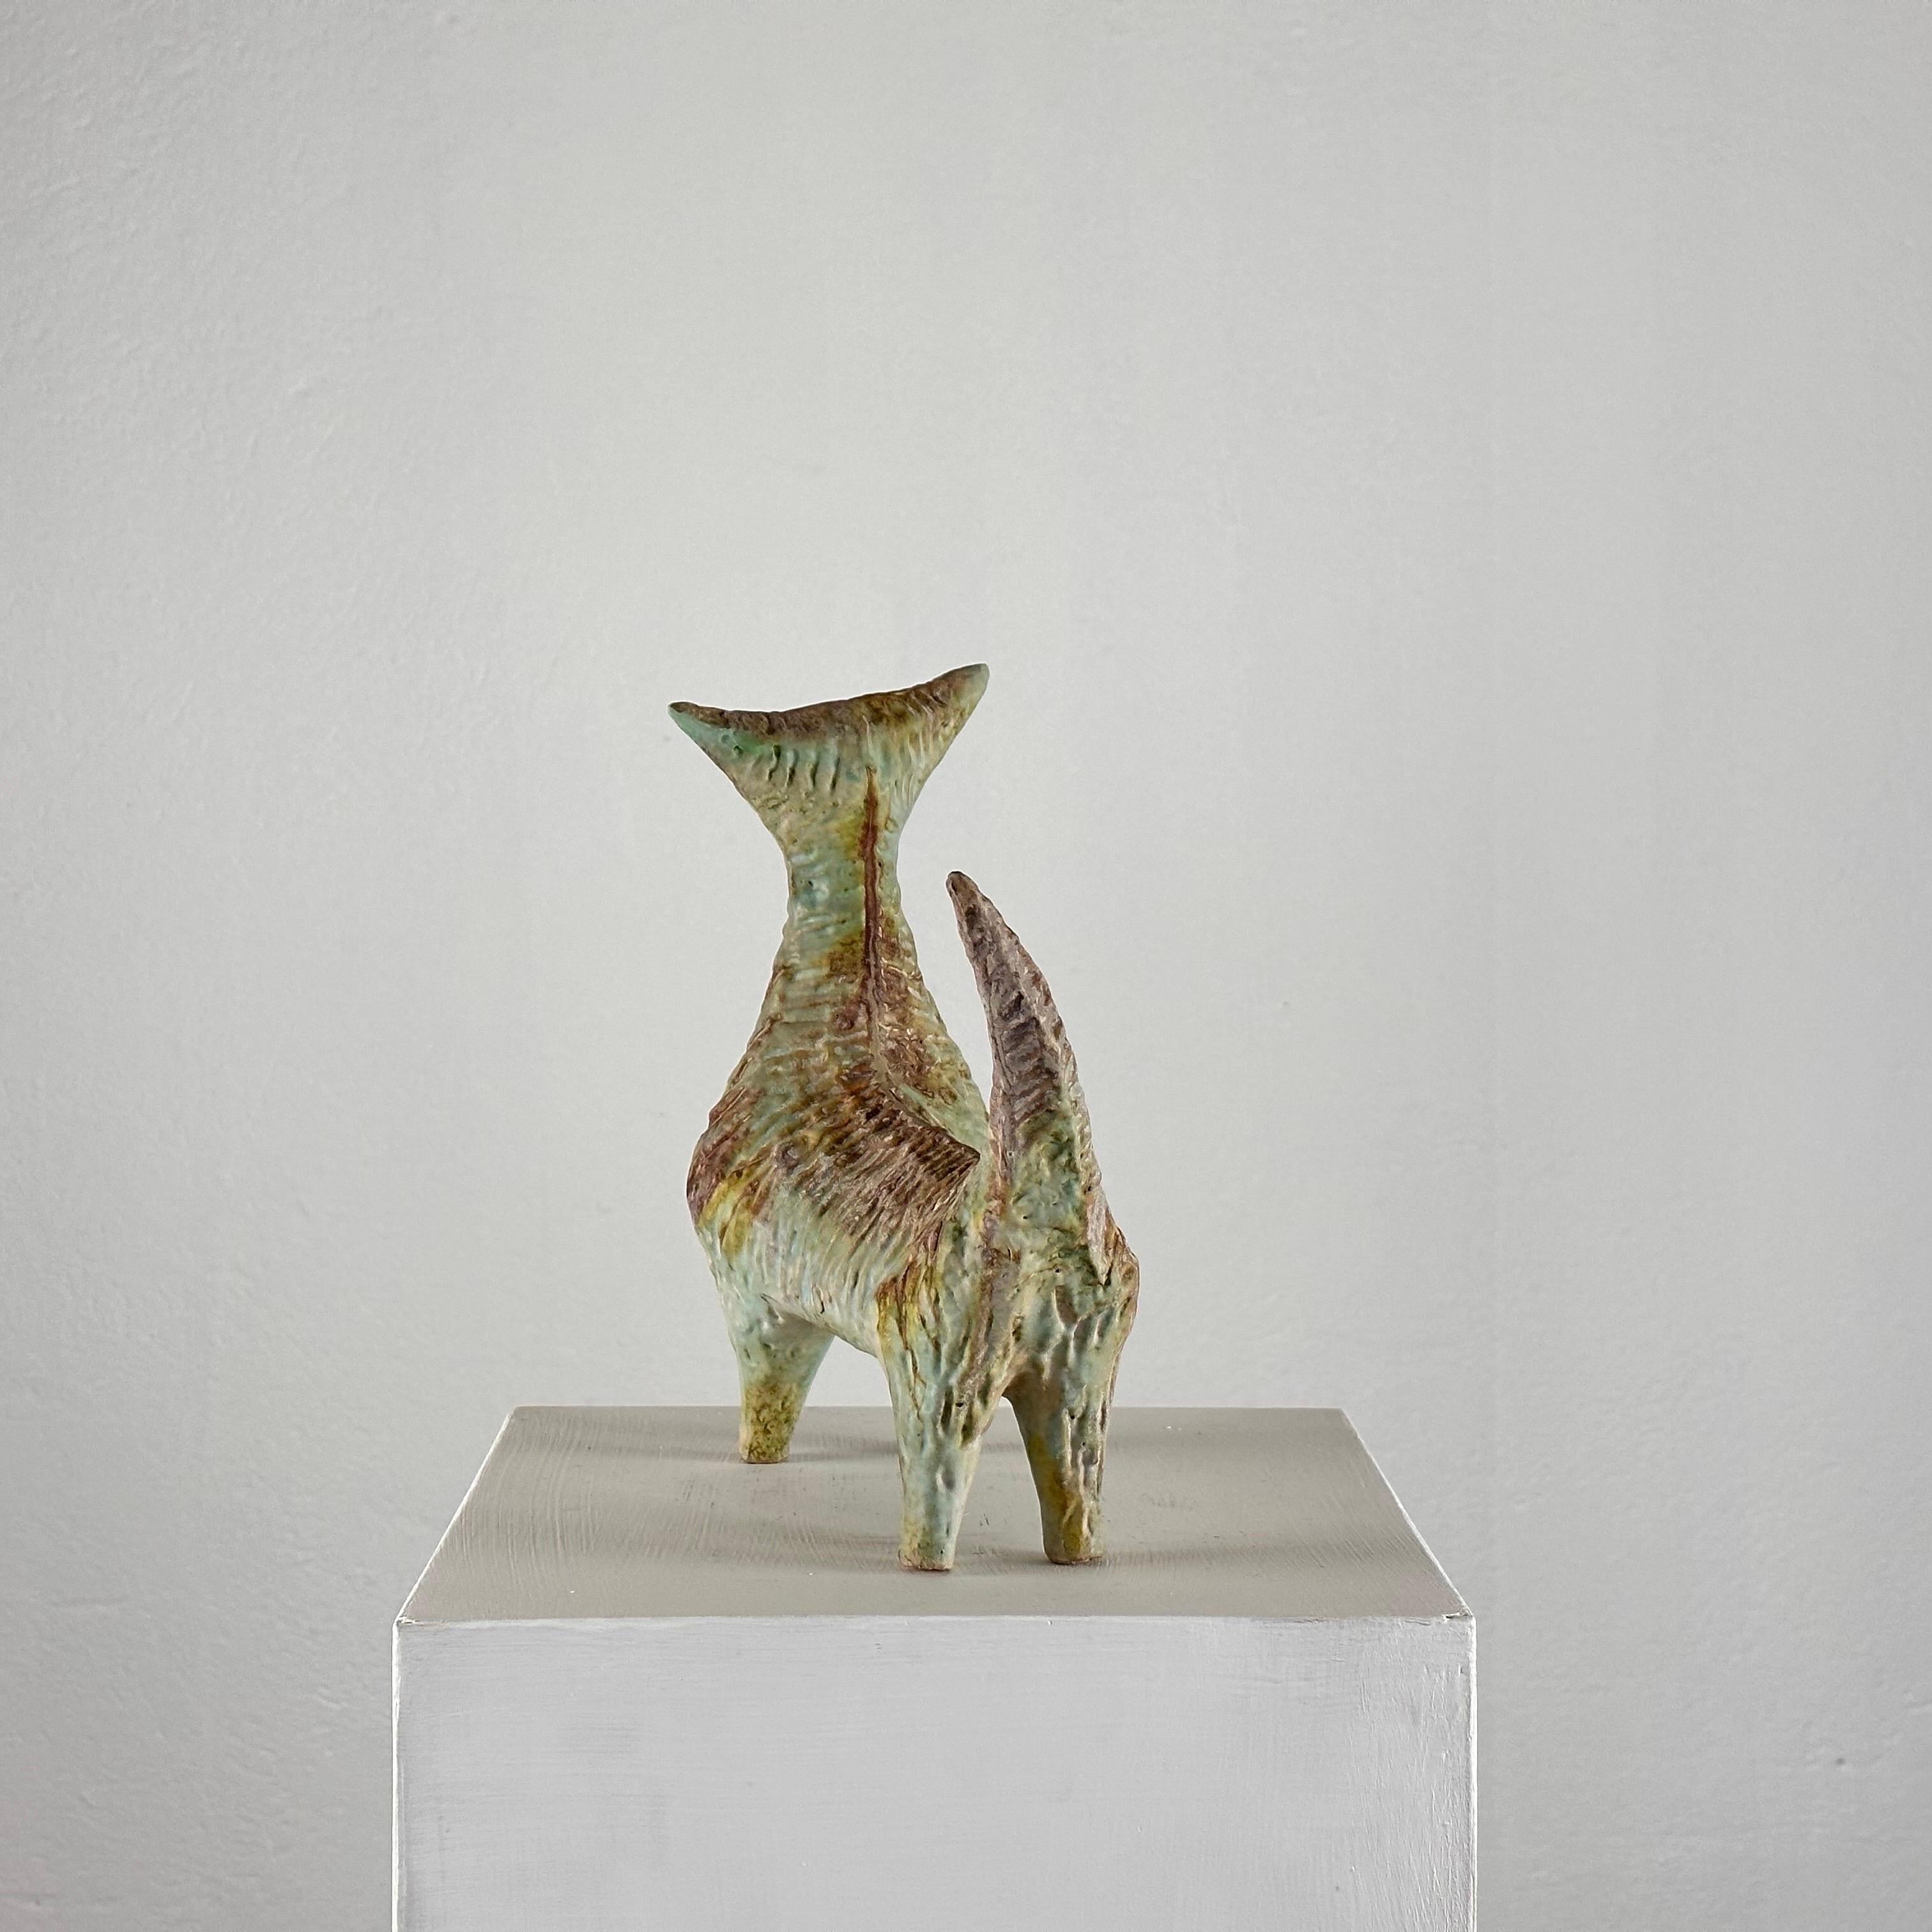 Hand-Crafted Exceptional Giovan Battista Mitri Ceramic Cat, Incredible Patina, 1950s For Sale